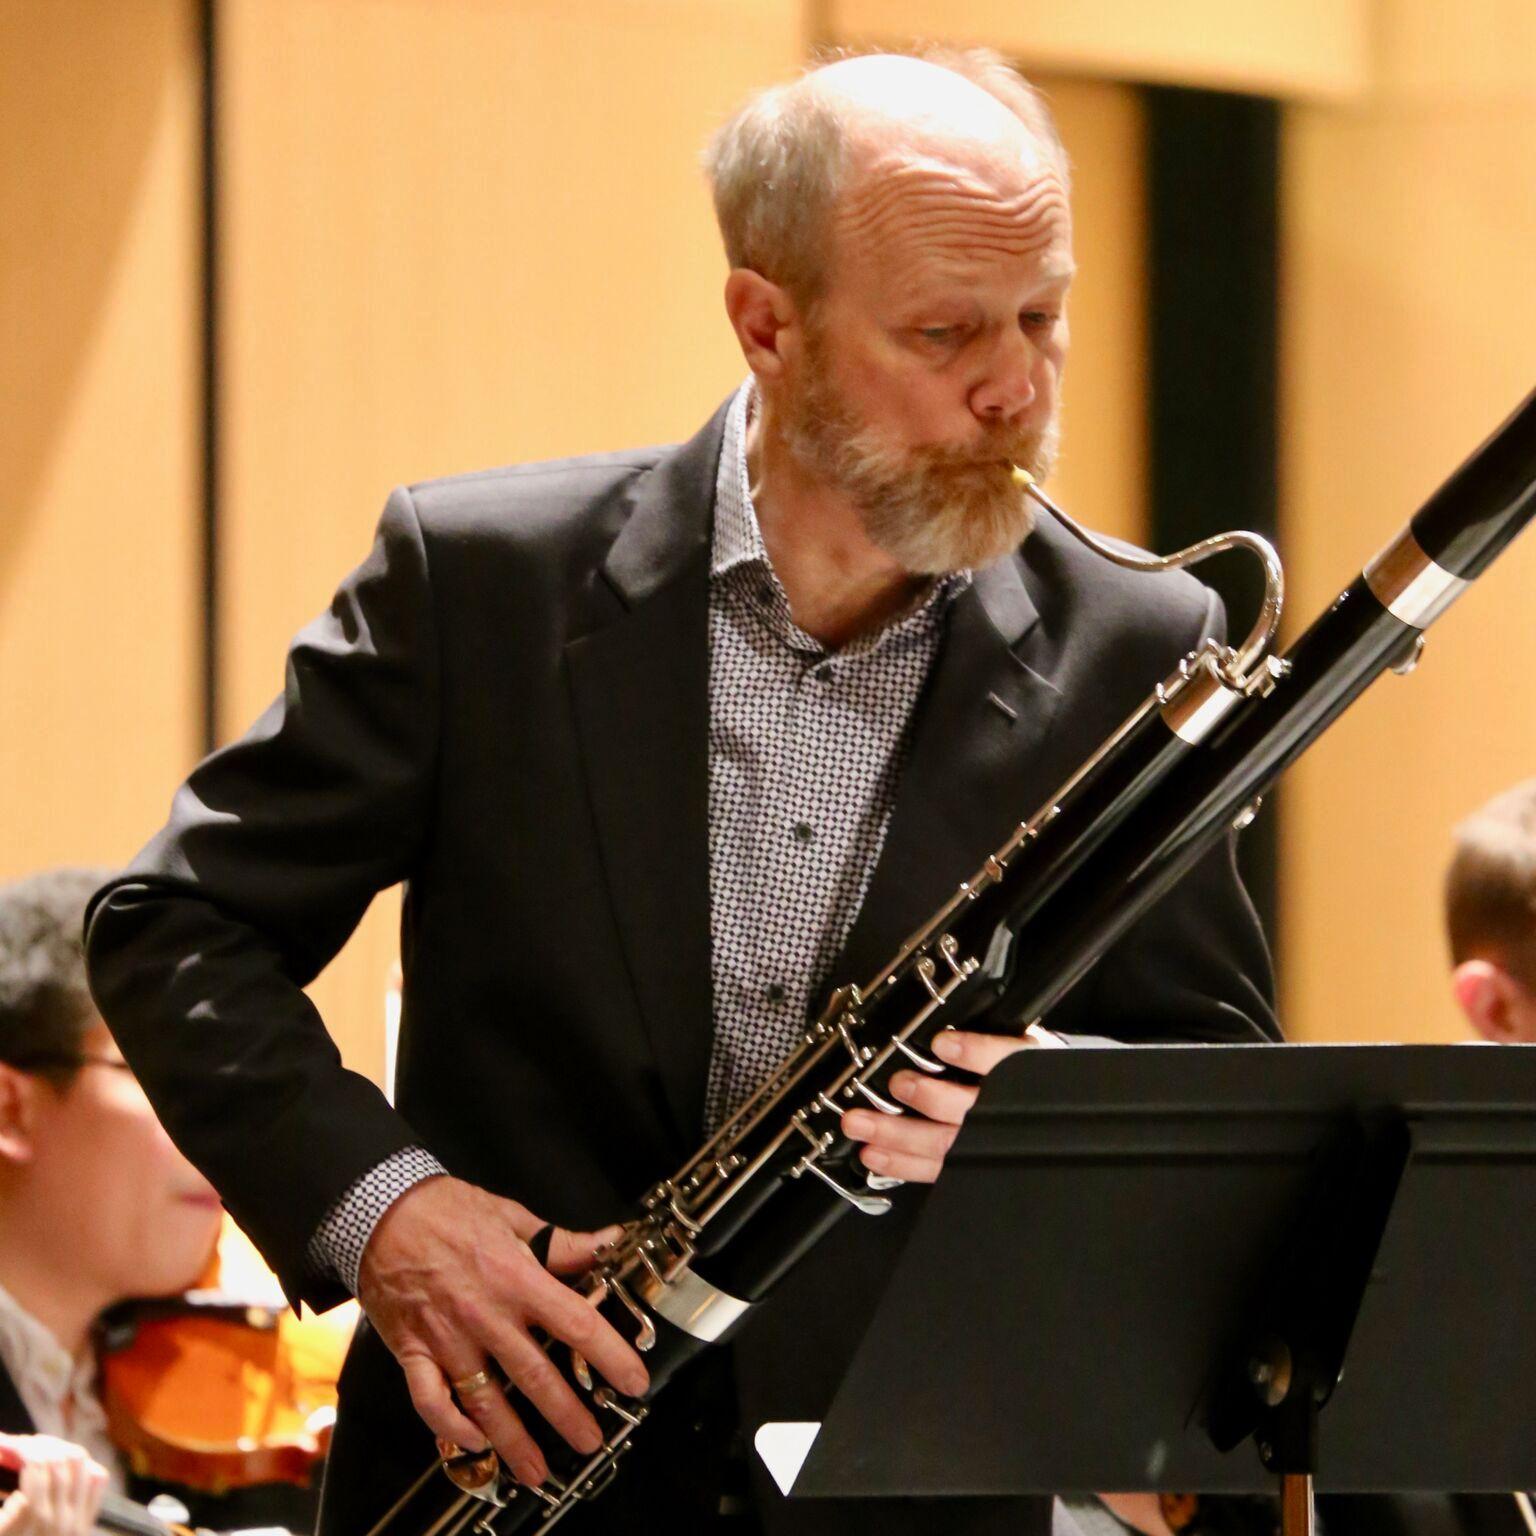 man with beard blows into a bassoon